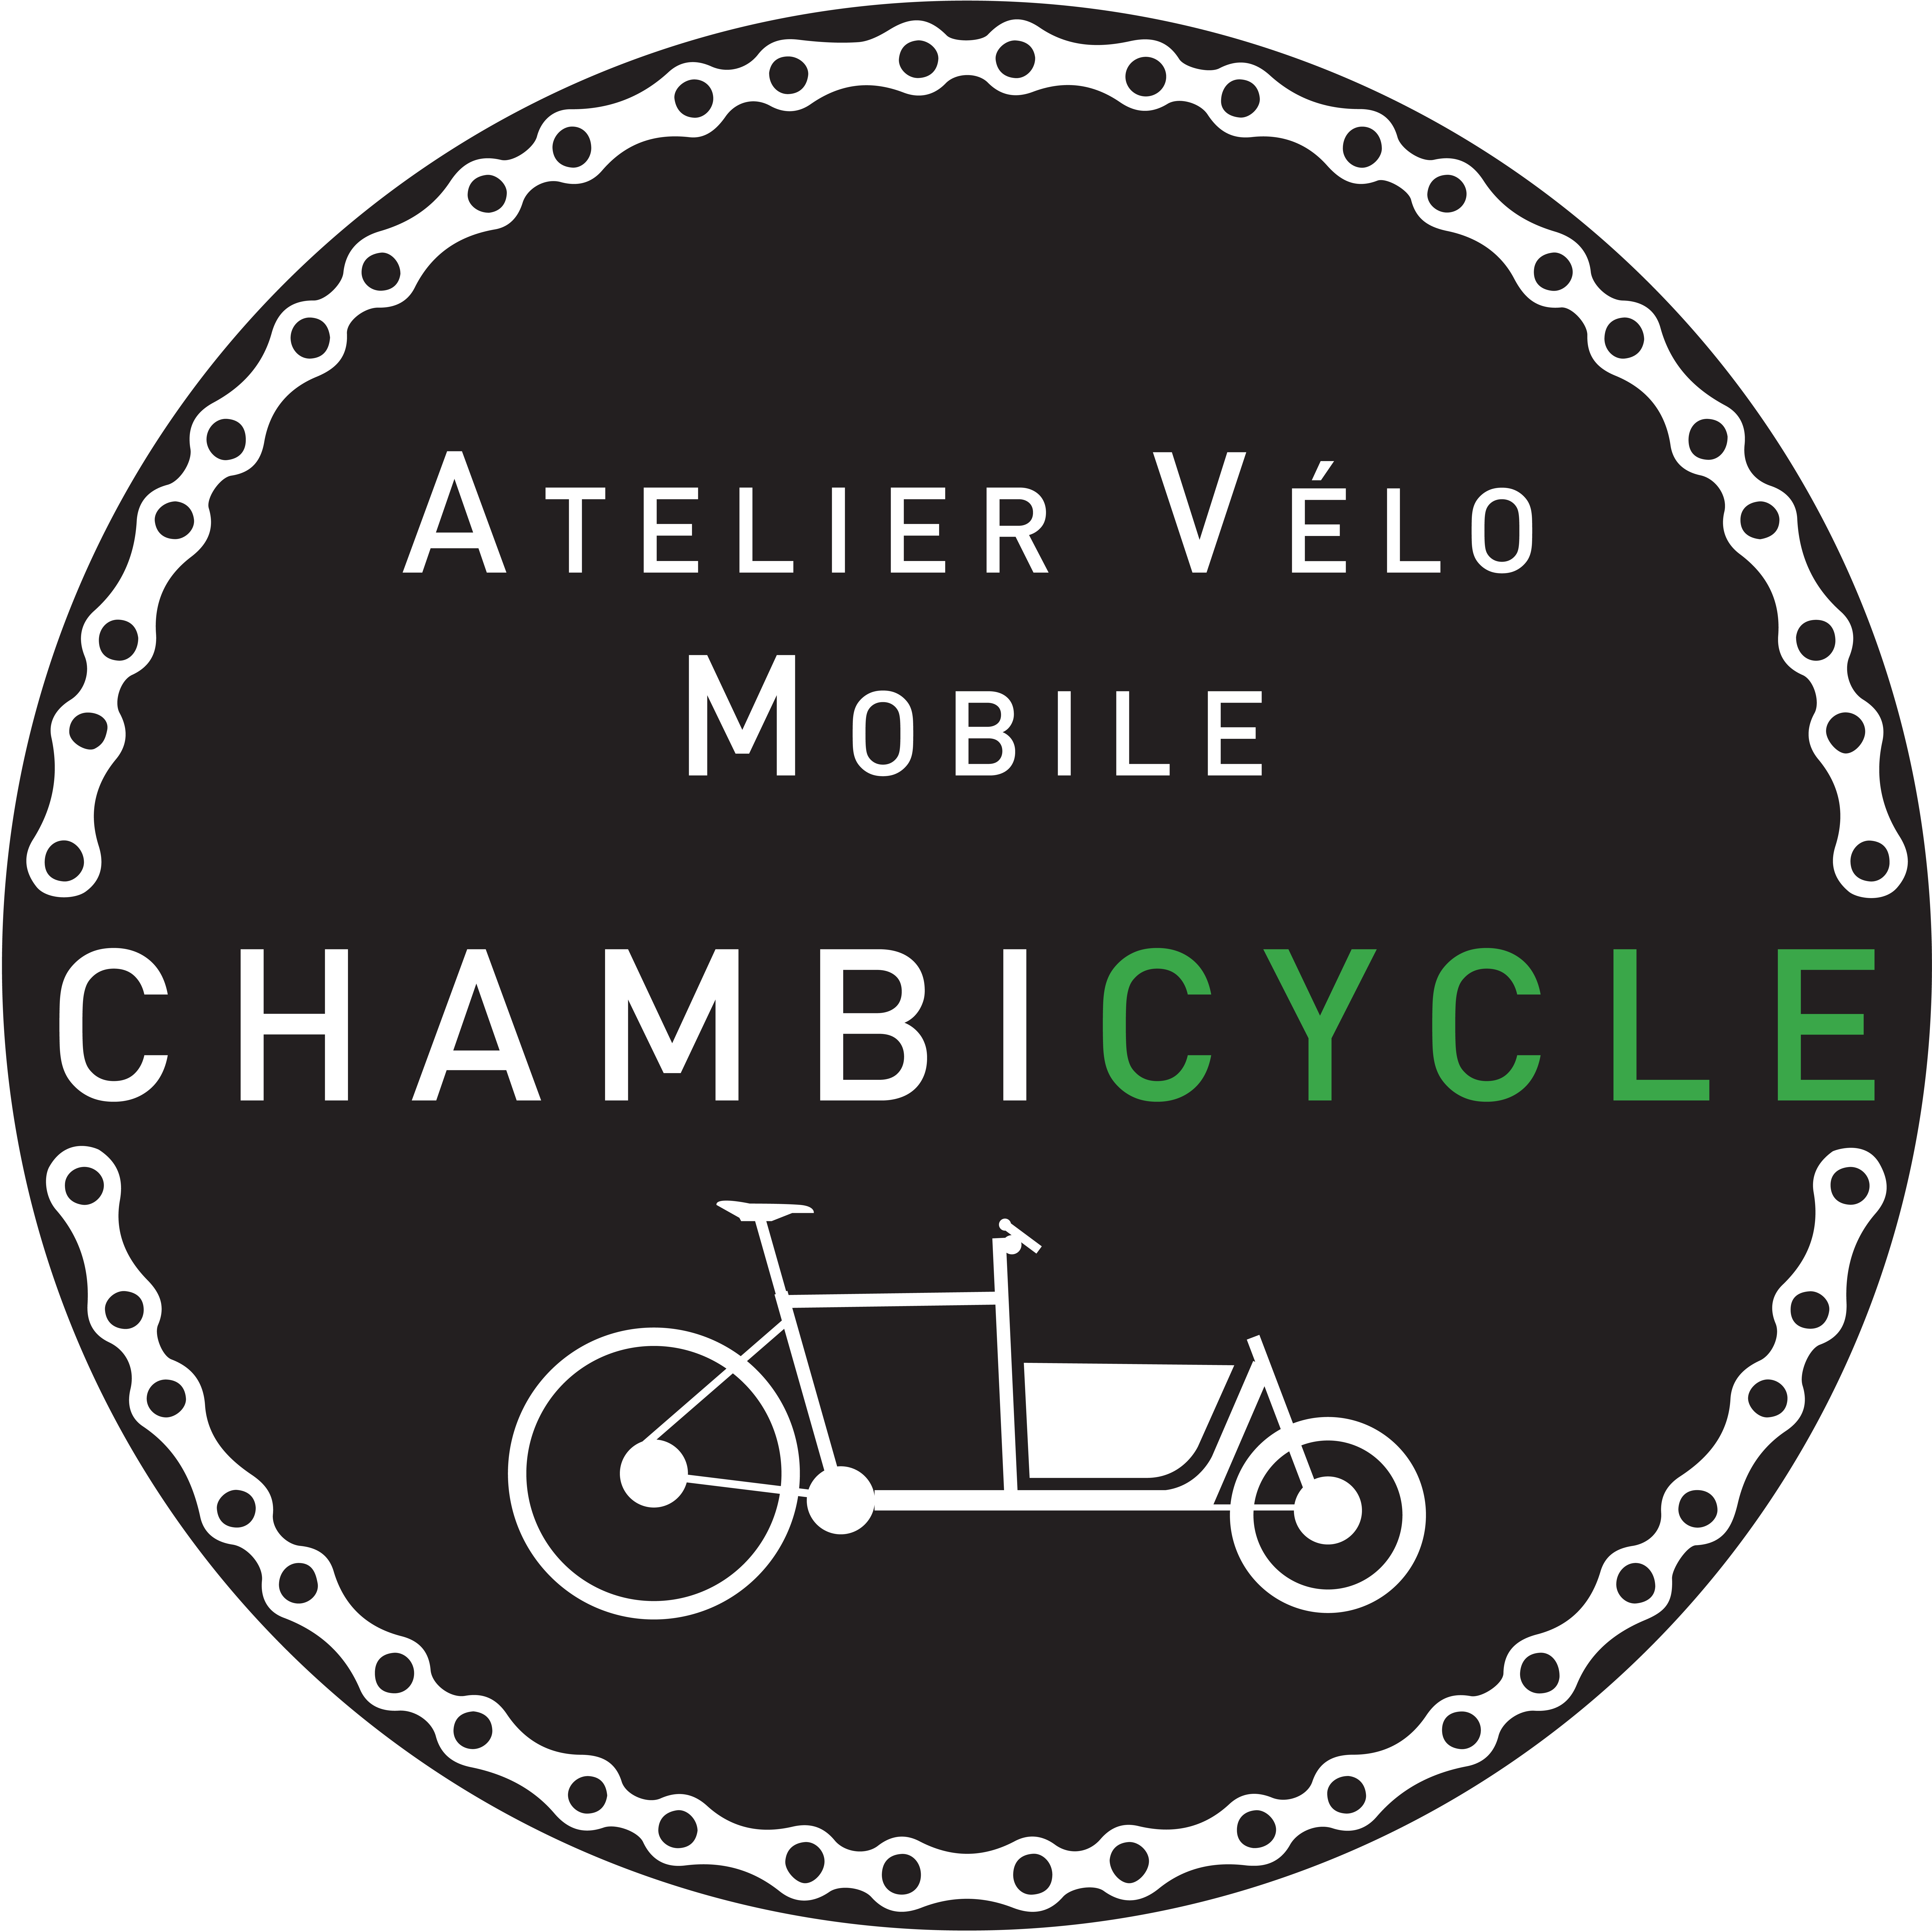 Chambicycle – Atelier mobile